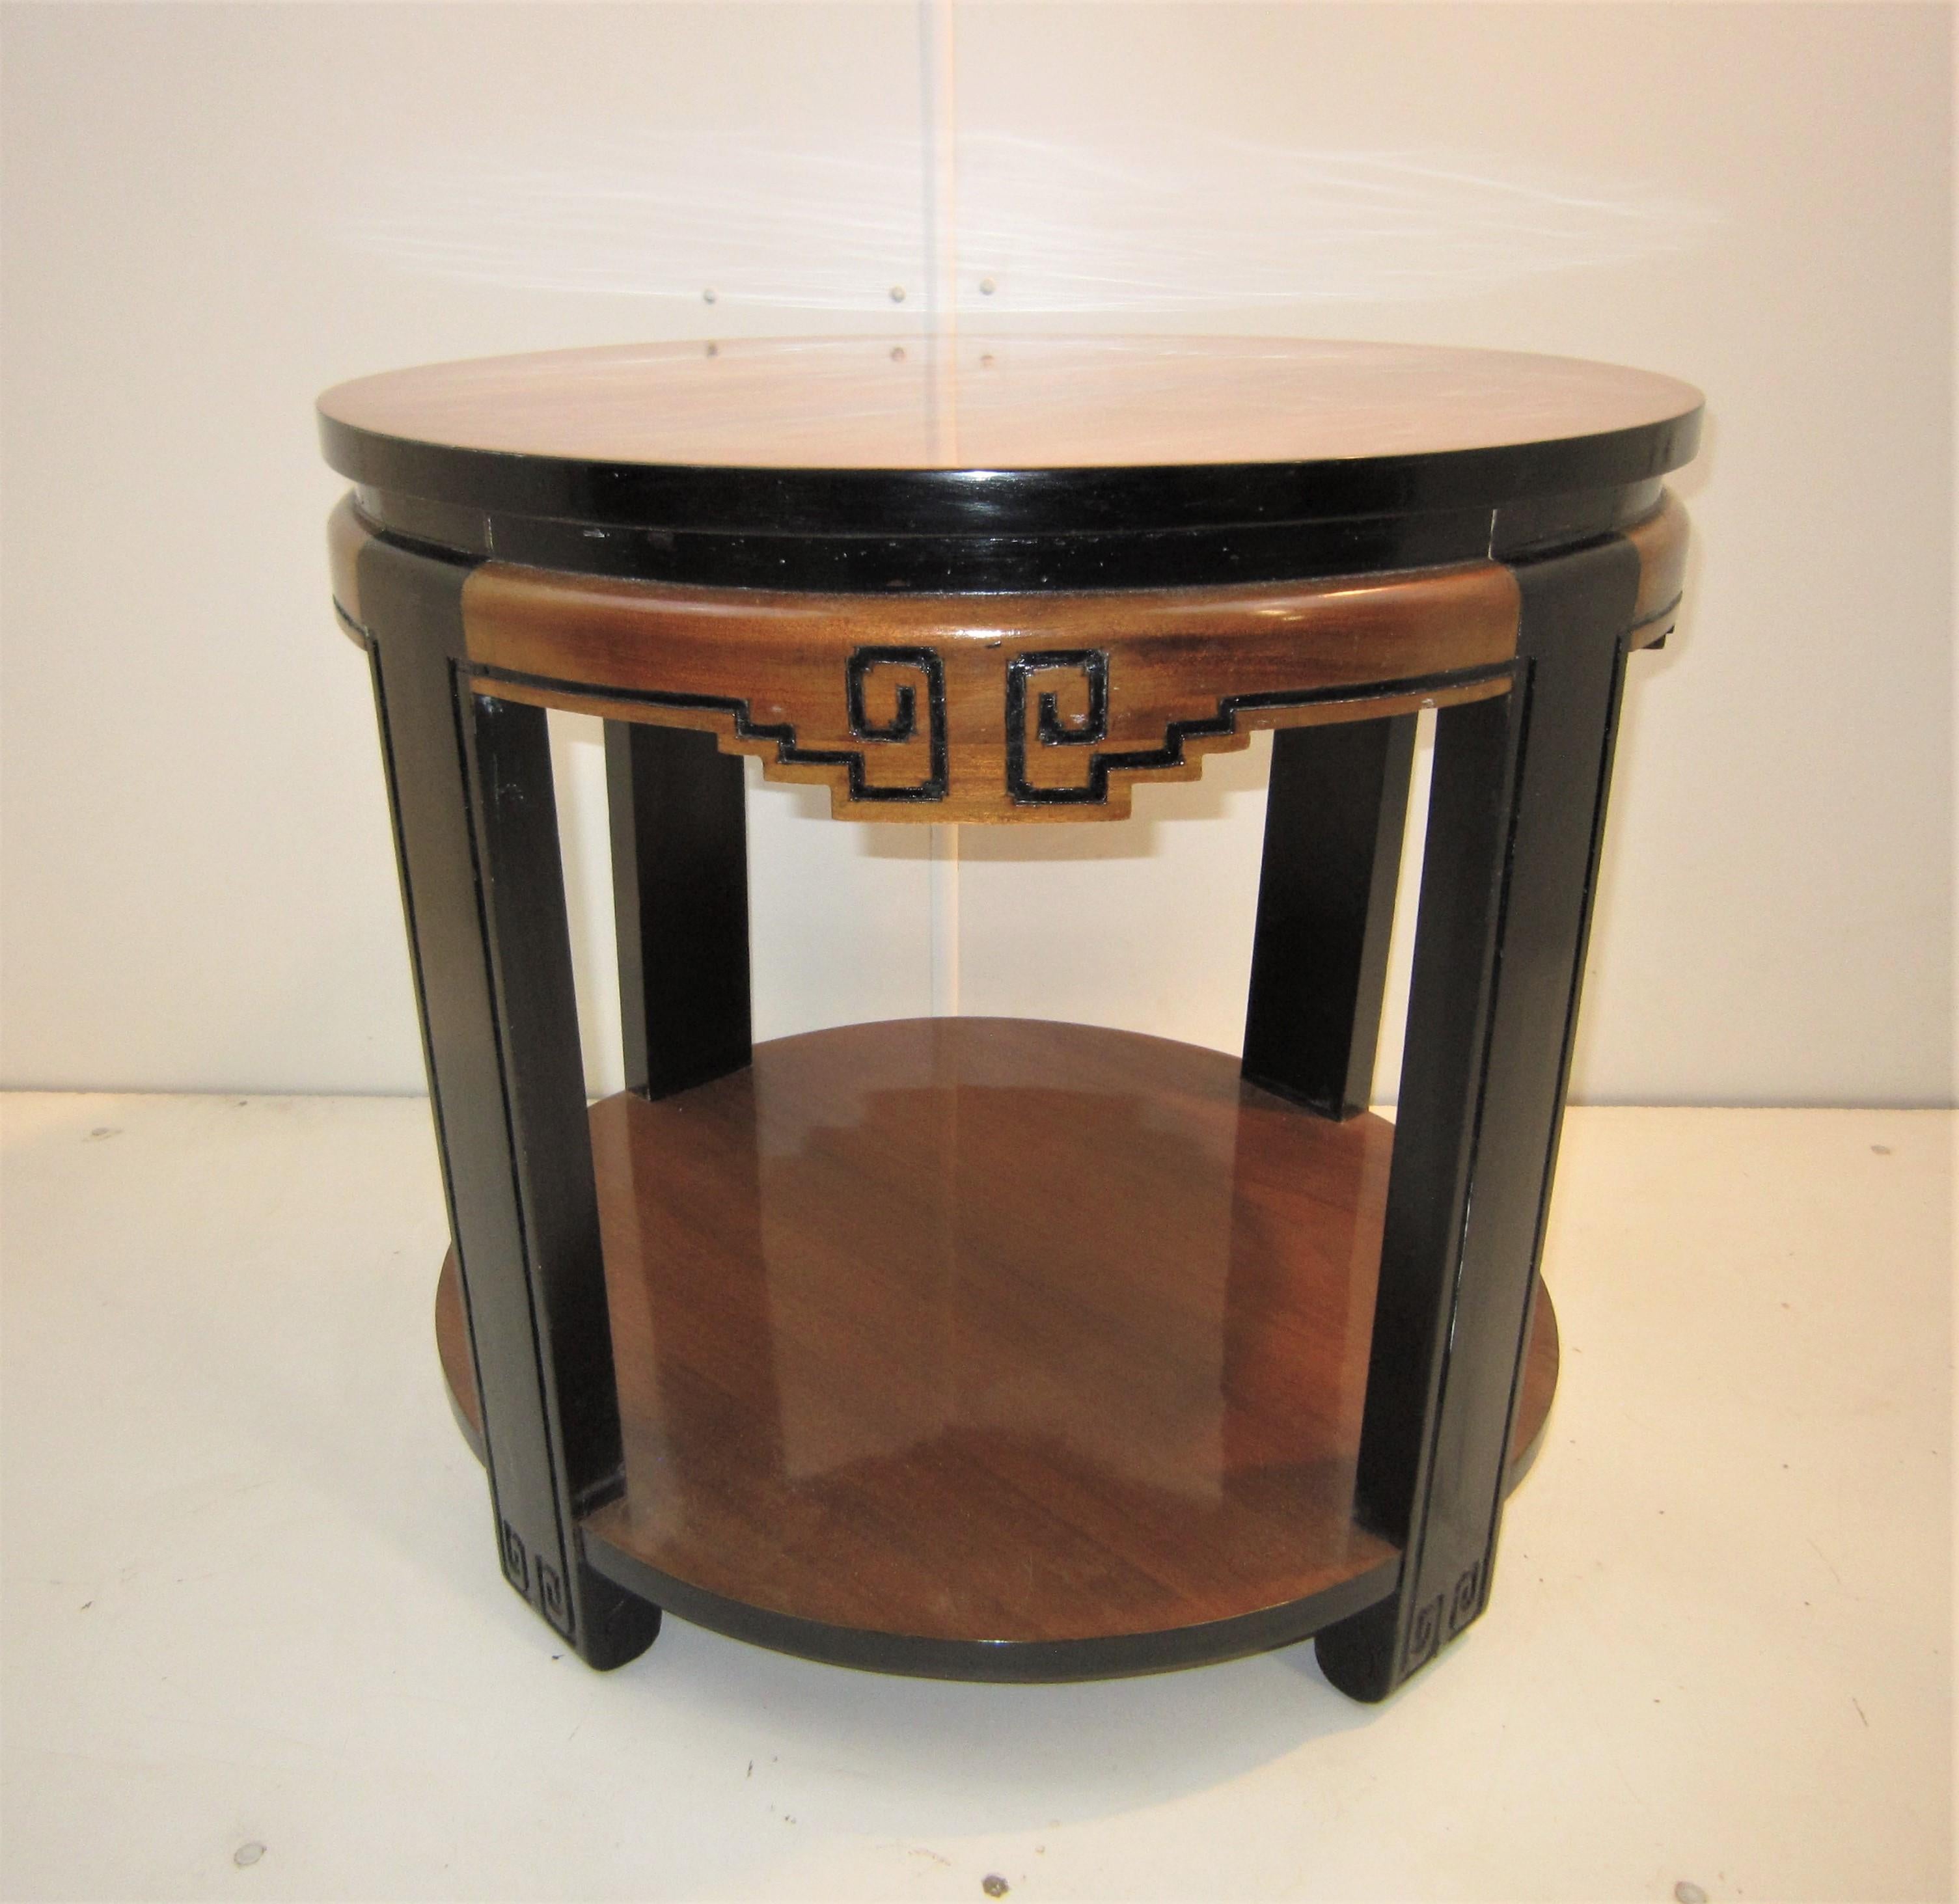 Original Art Deco Two-Tone Circular Table with Chinoiserie Design For Sale 6